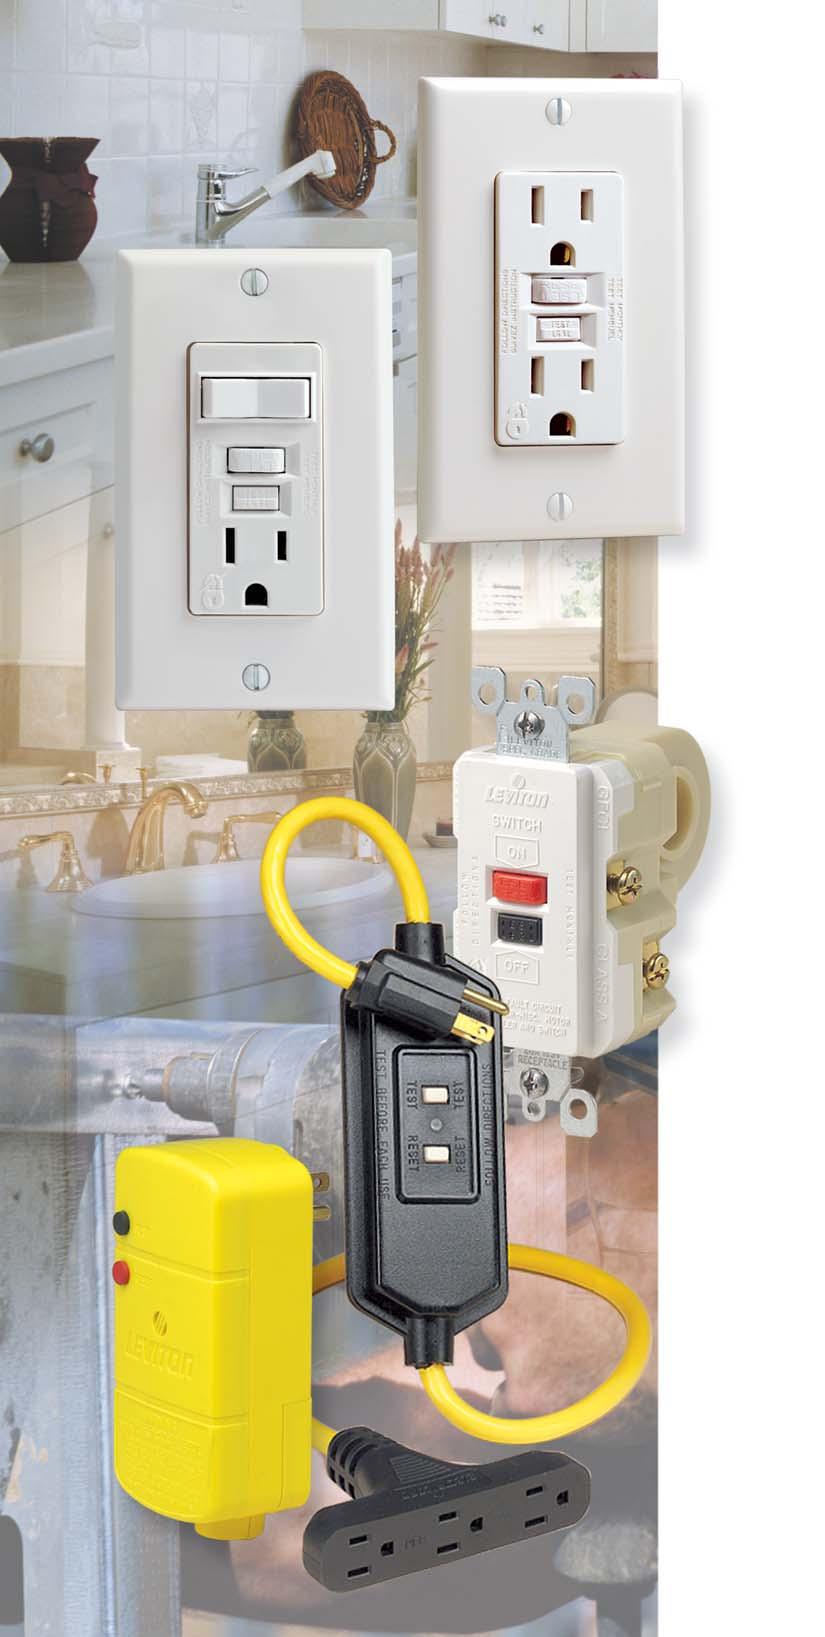 SECTION FCI Personnel Protection Devices INDEX FCI Personnel Protection Devices SmartLock FCI Devices................2 5 Overview...........................2 3 ospital rade Receptacles.